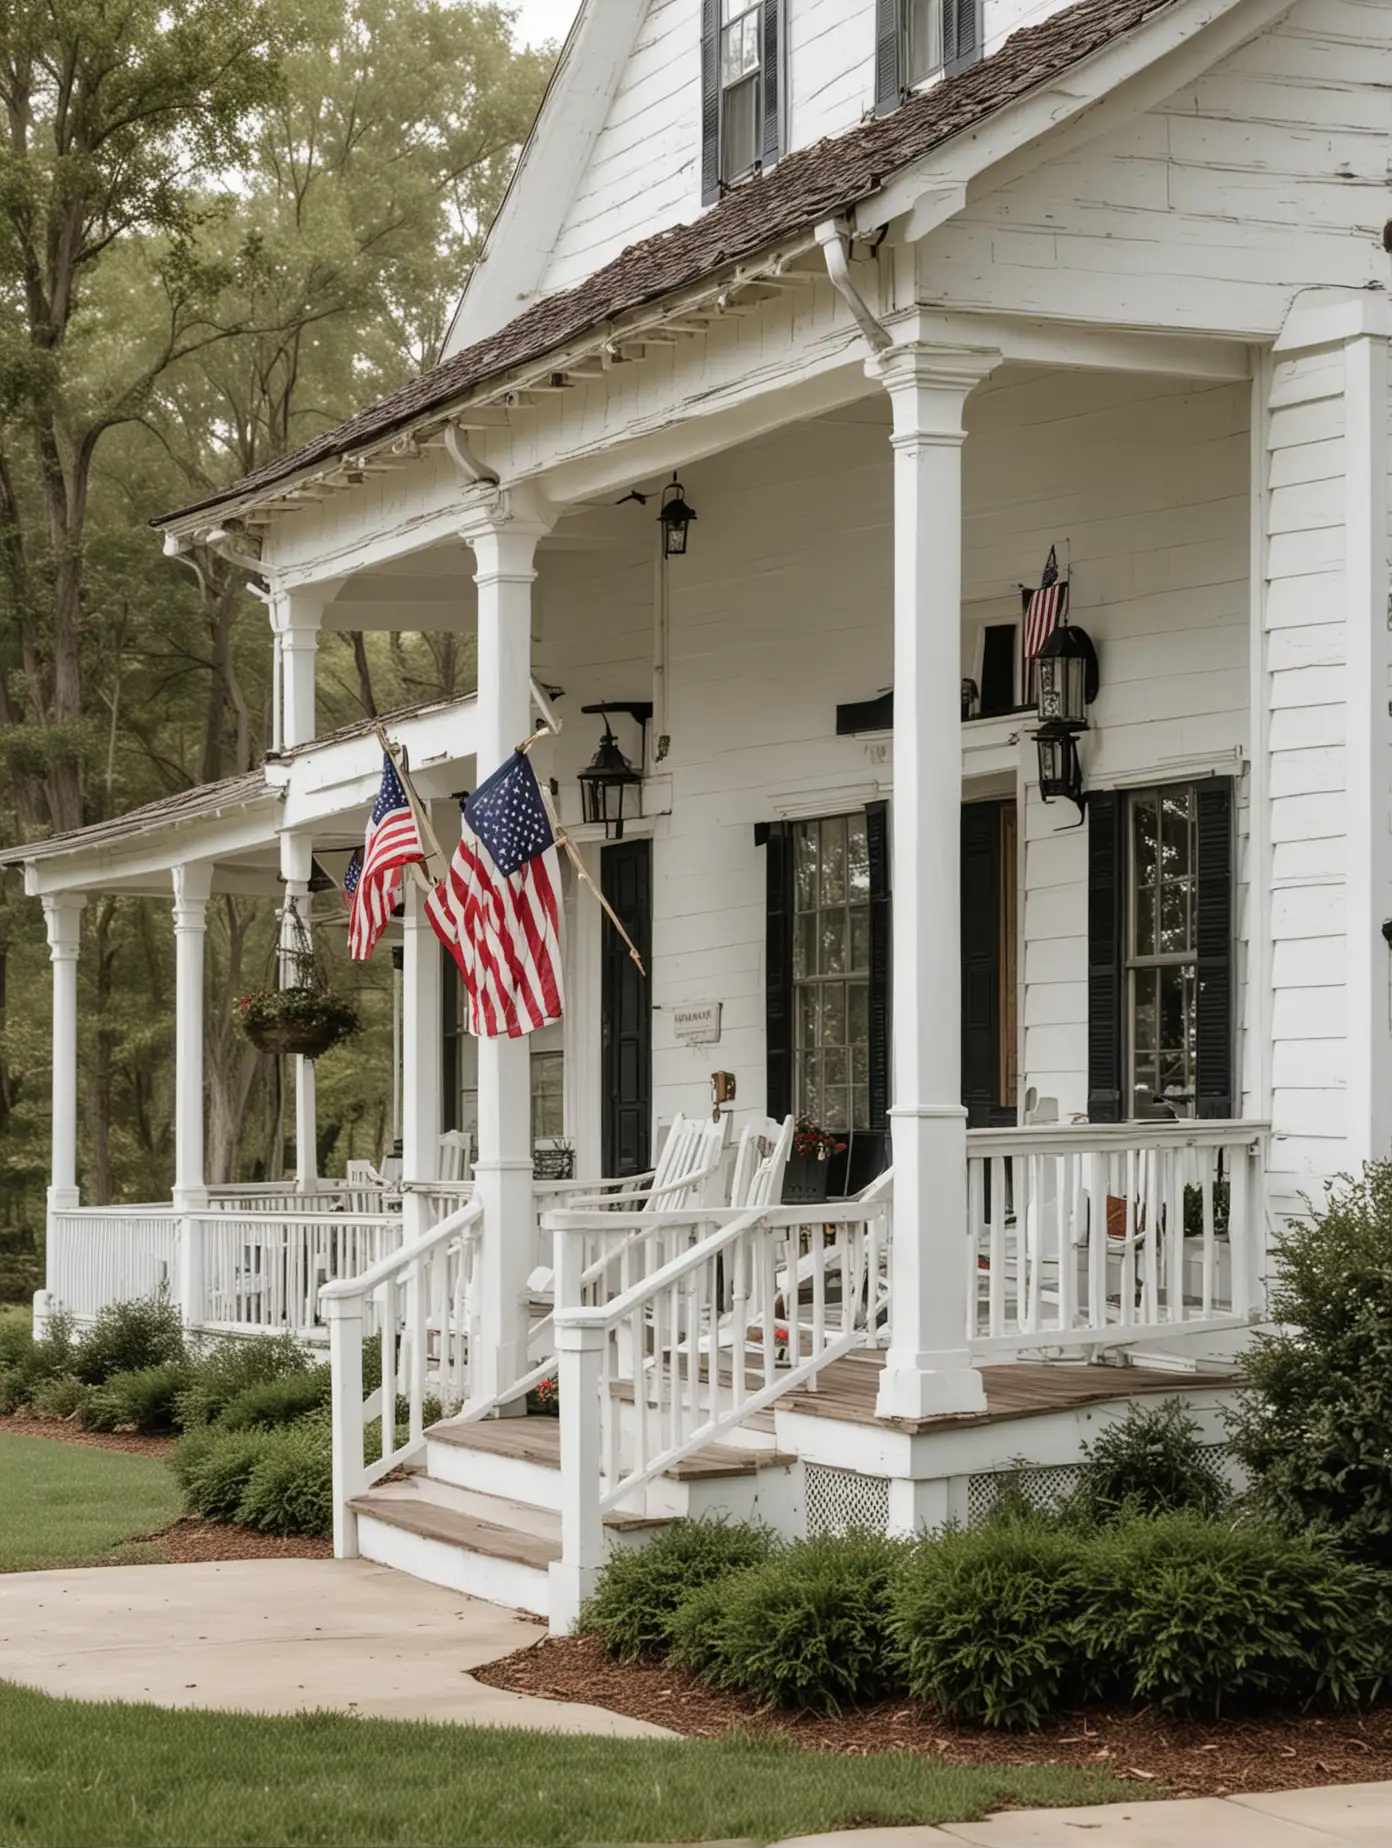 White Farmhouse with American Flag on Porch Railing